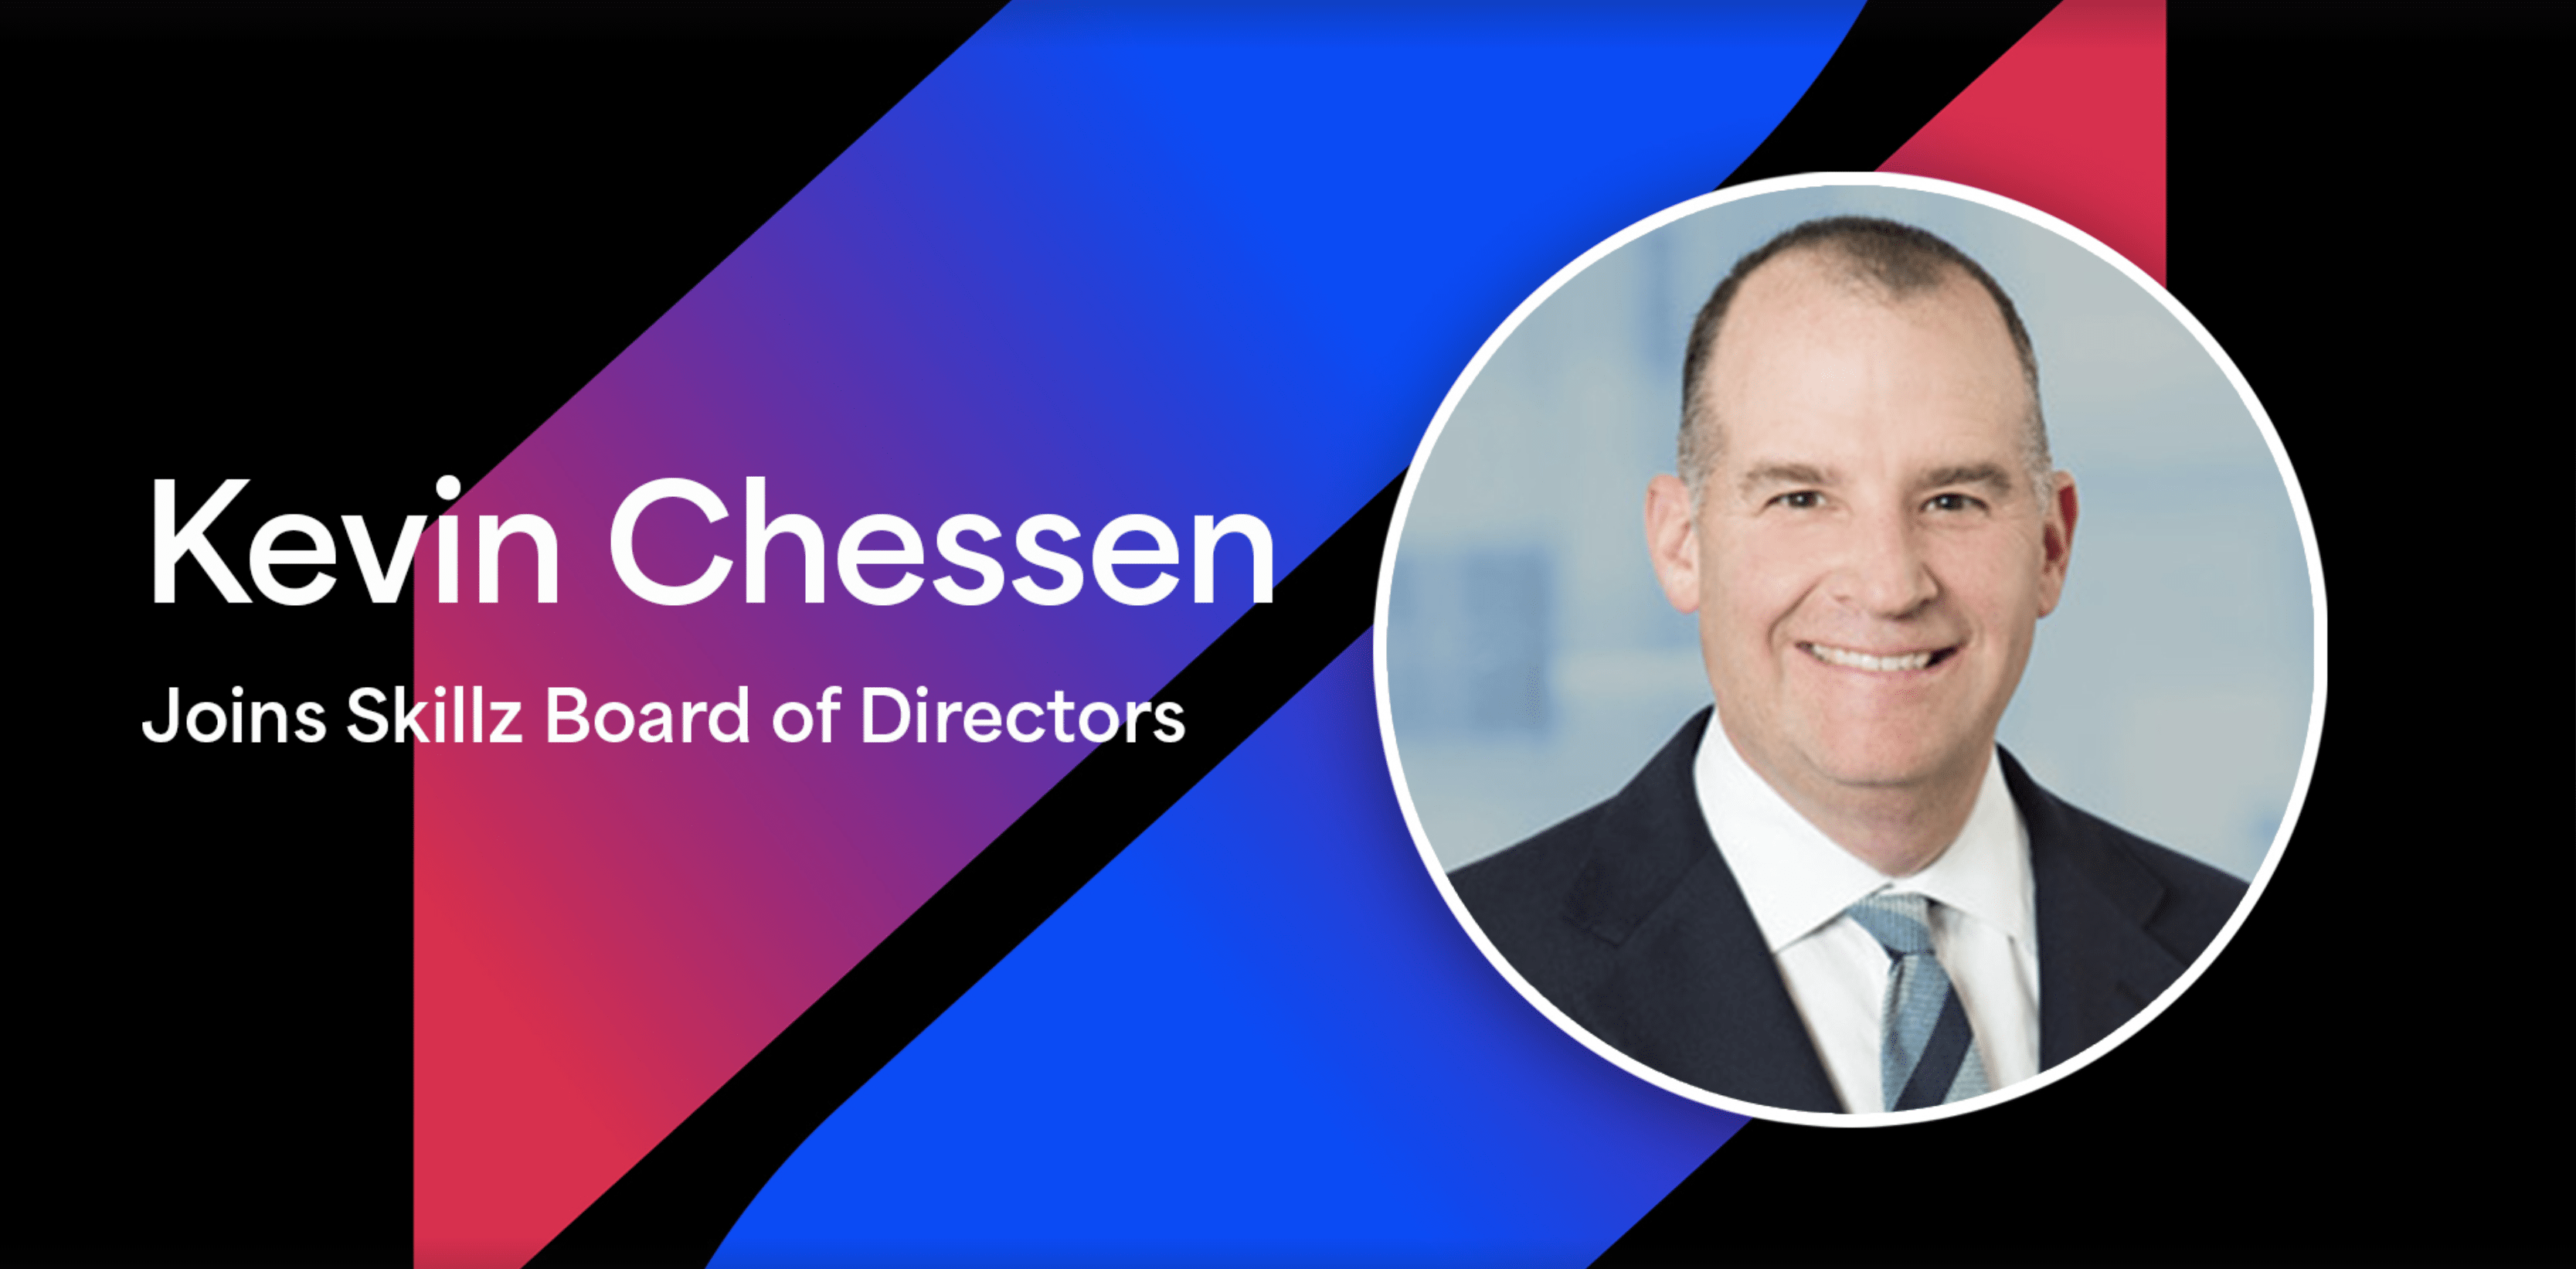 Financial Executive Kevin Chessen Joins Skillz Board of Directors